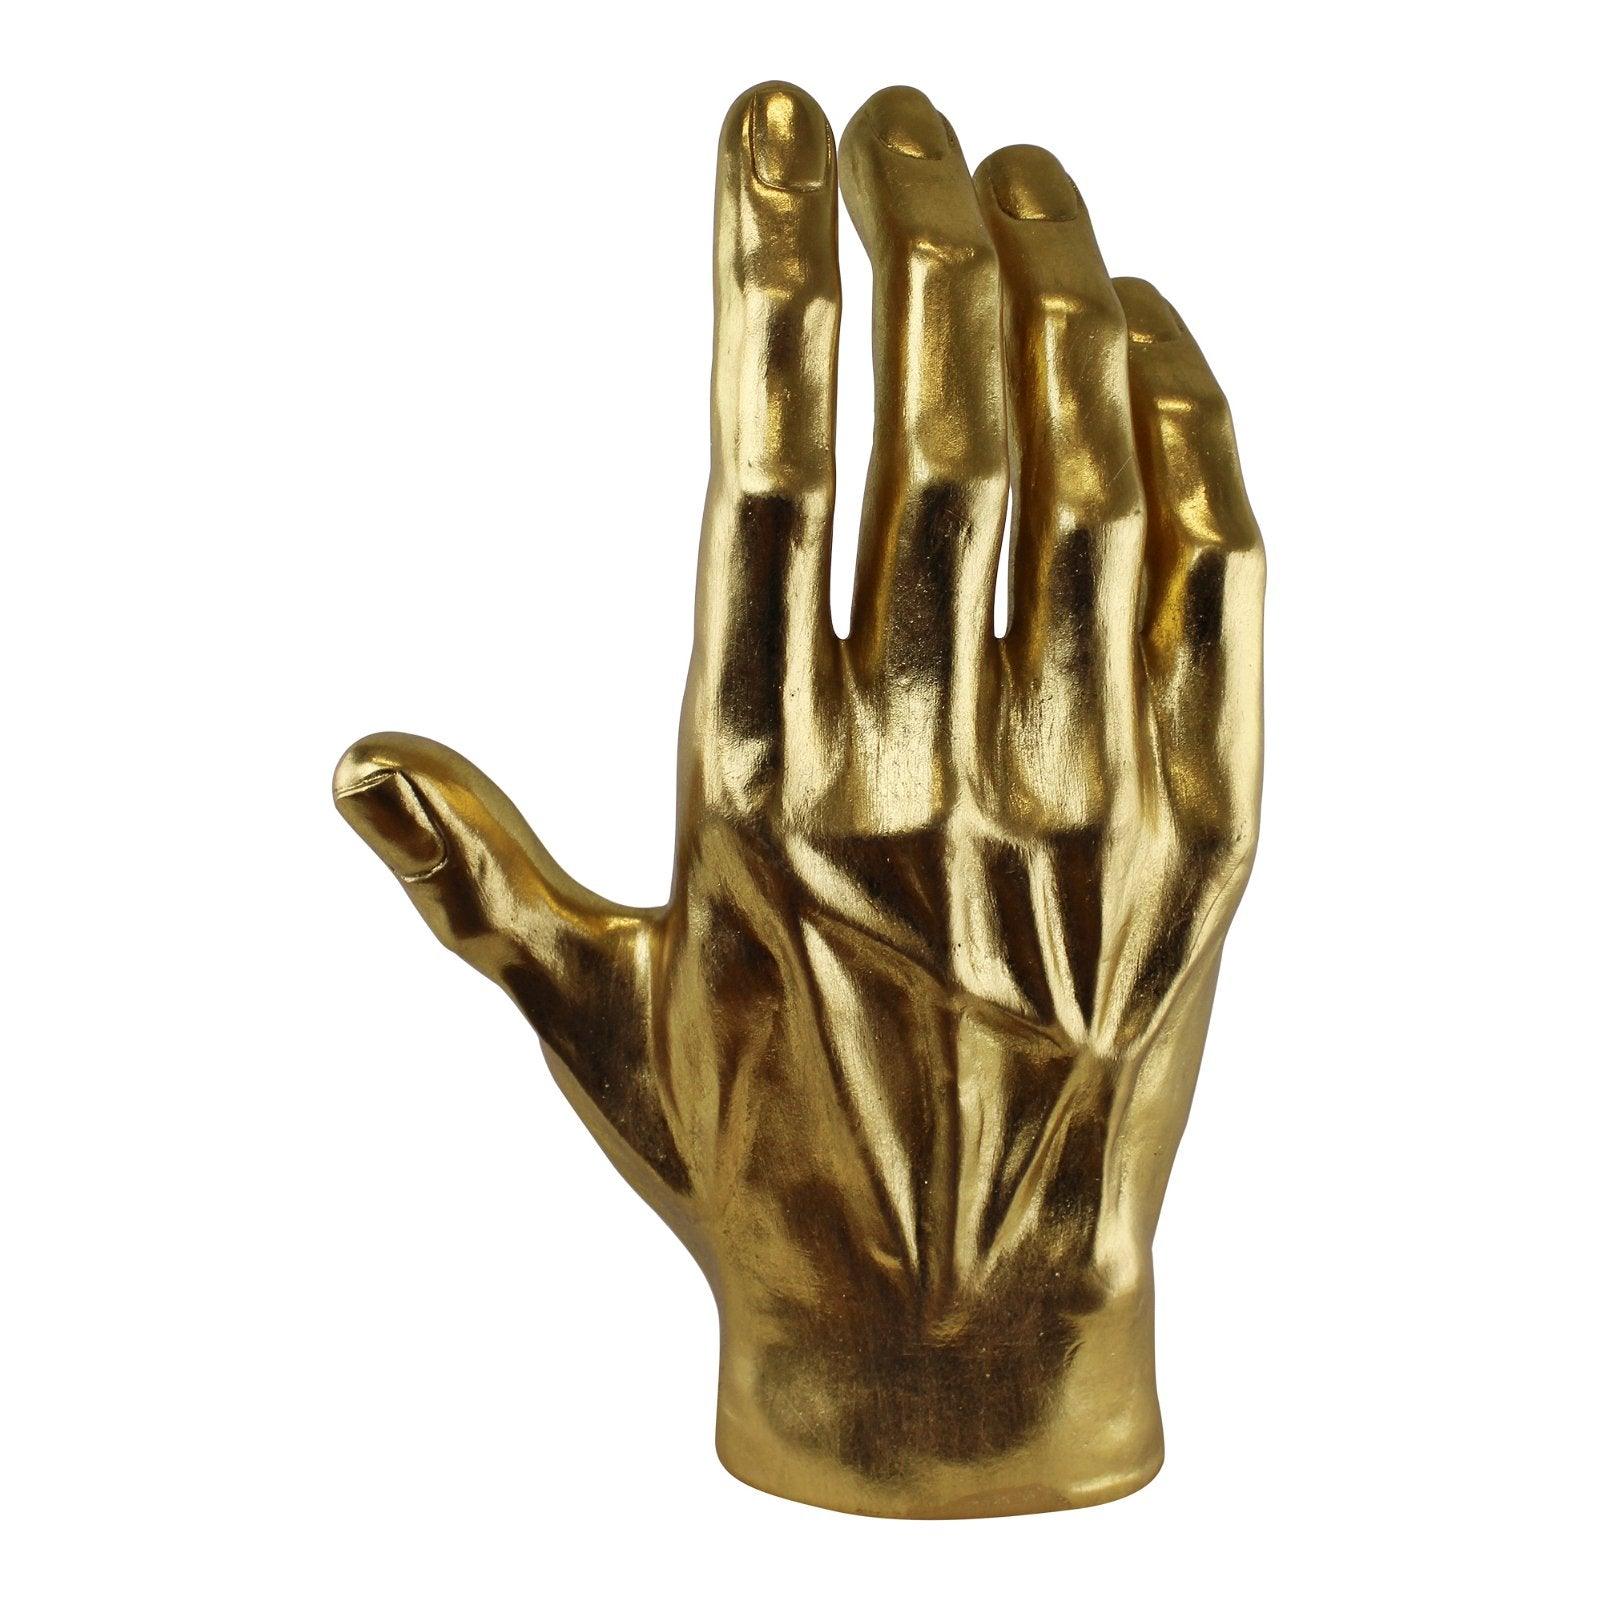 Large Gold Decorative Hand Ornament - £75.99 - Figurines & Statues 